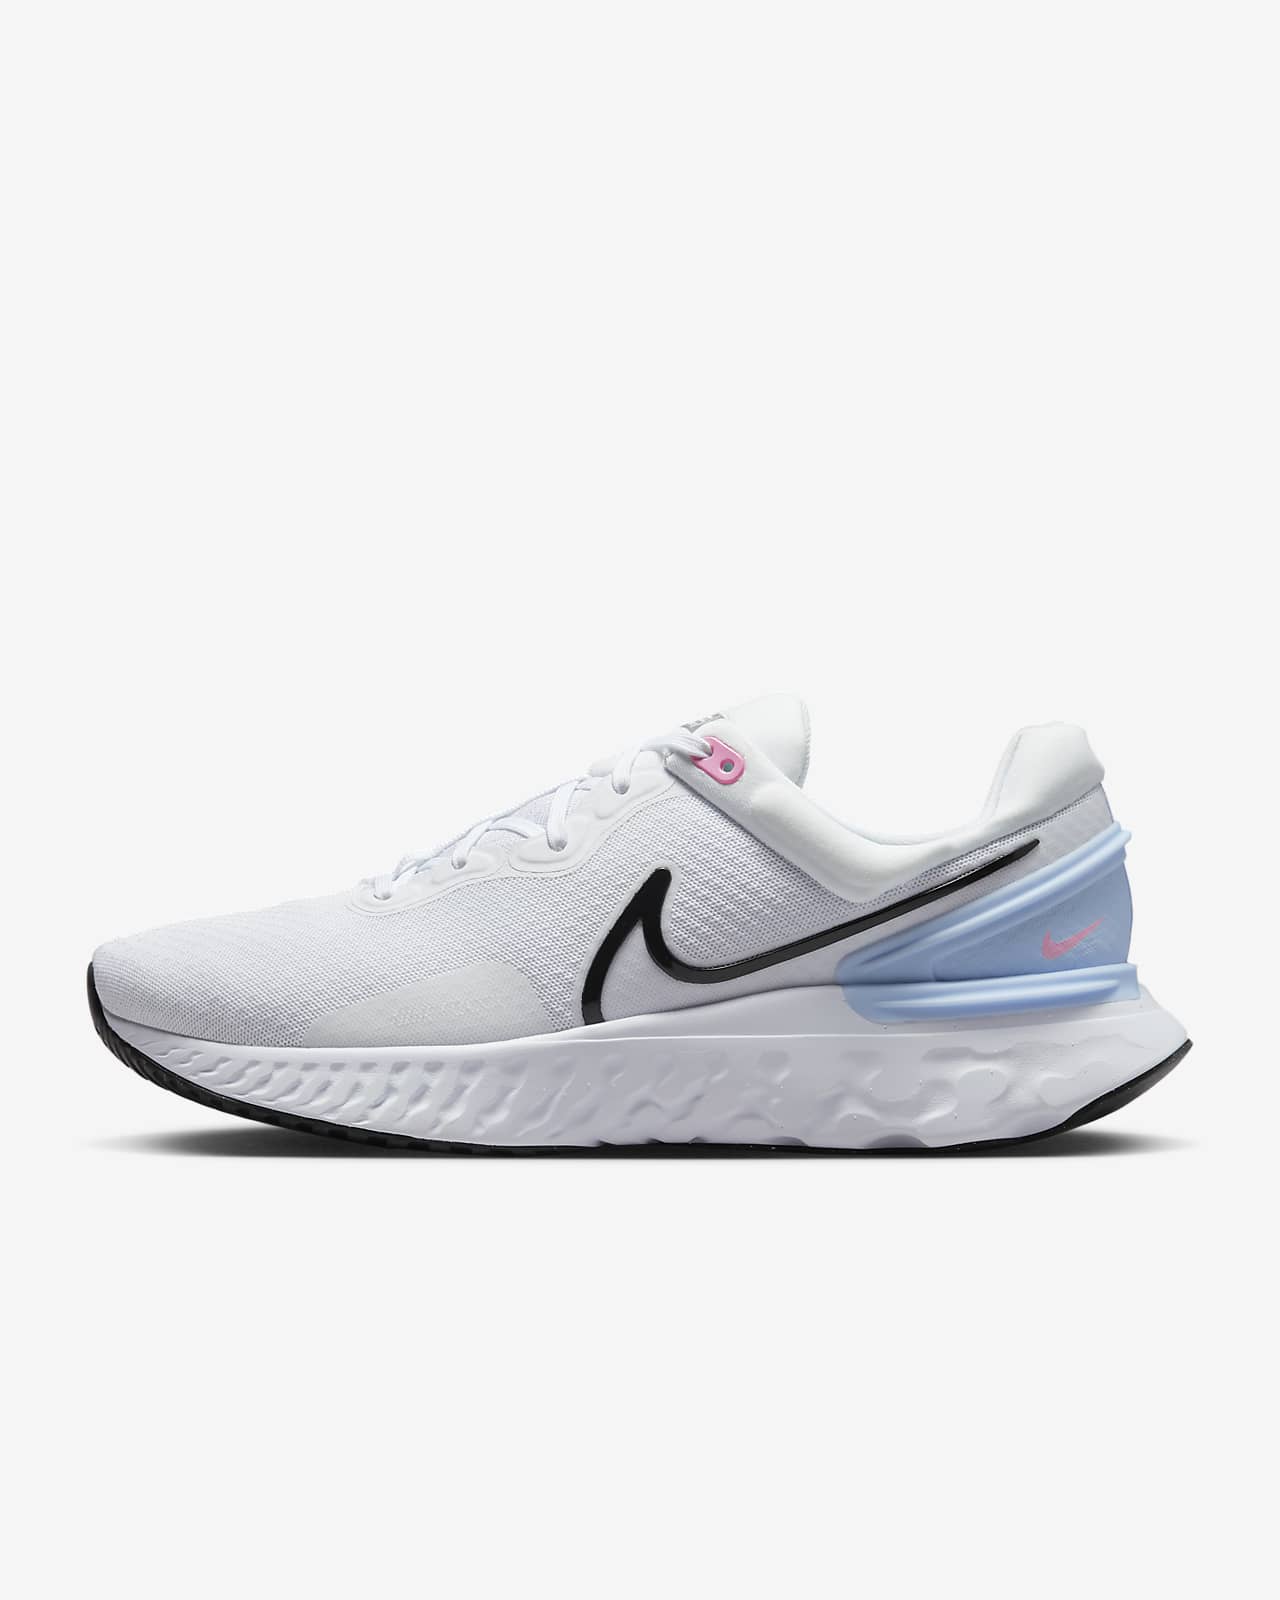 nike react shoes price in india